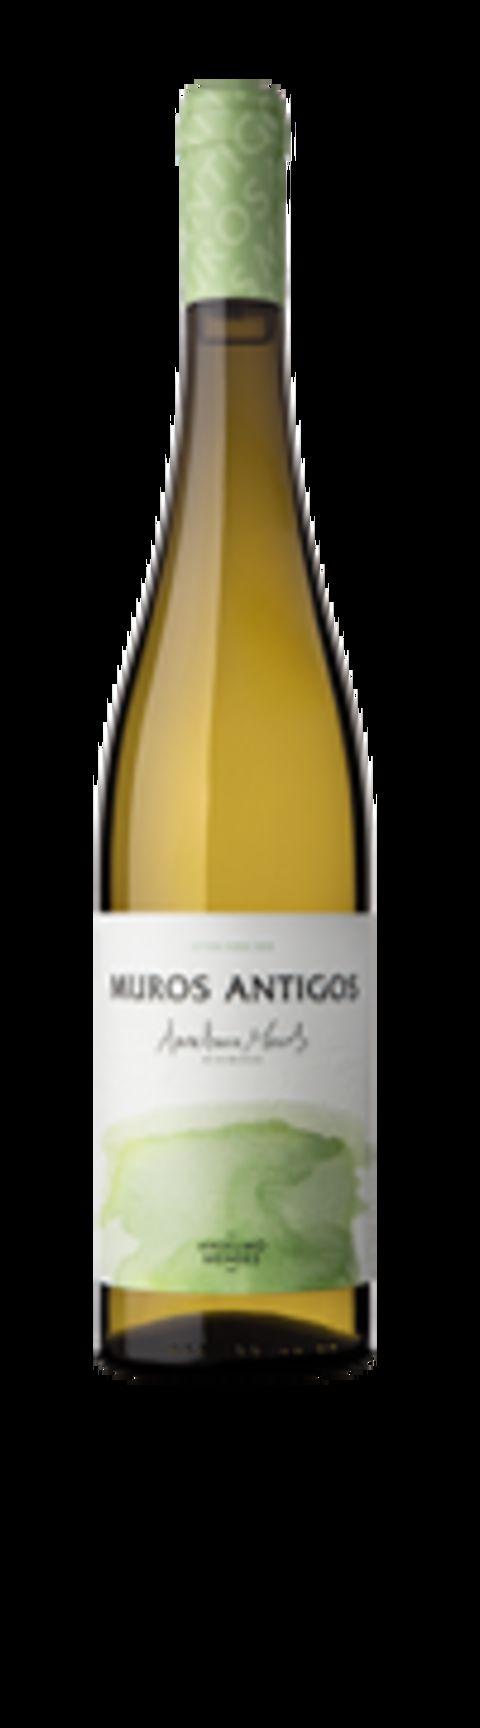 Acceptable storage time 10 years Type of wine White wine from the Alvarinho grape variety, grown exclusively in Monção and Melgaço.